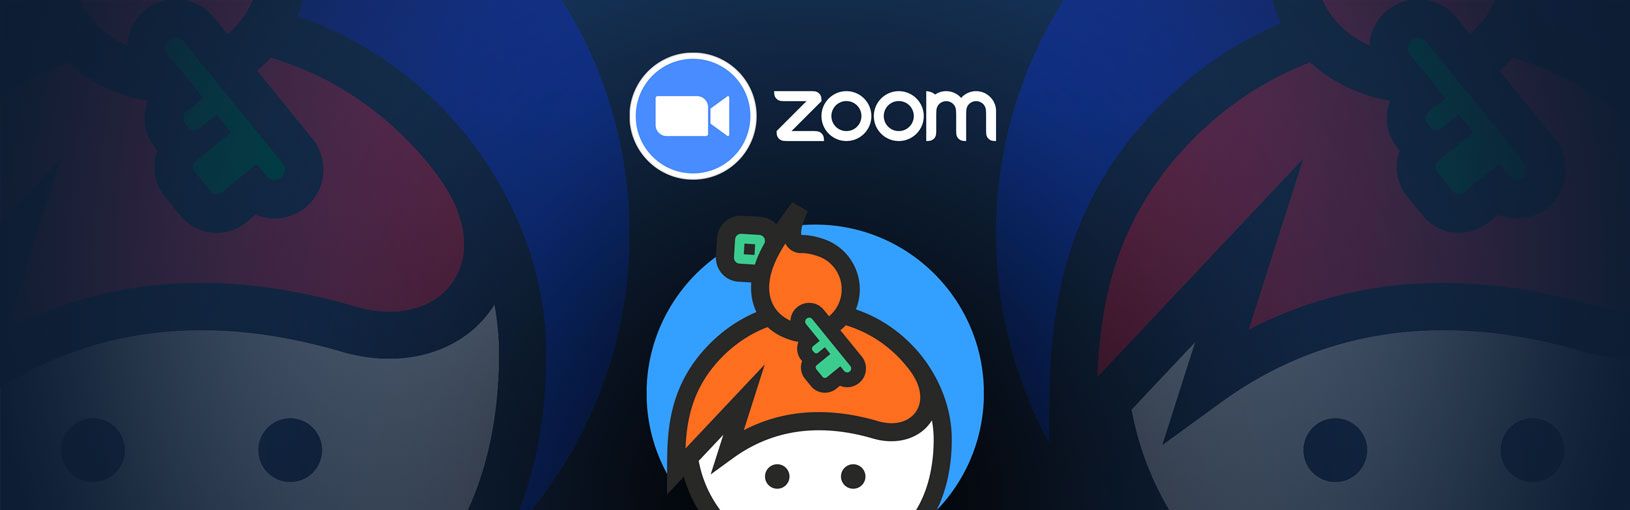 deleted zoom keybase app chat images